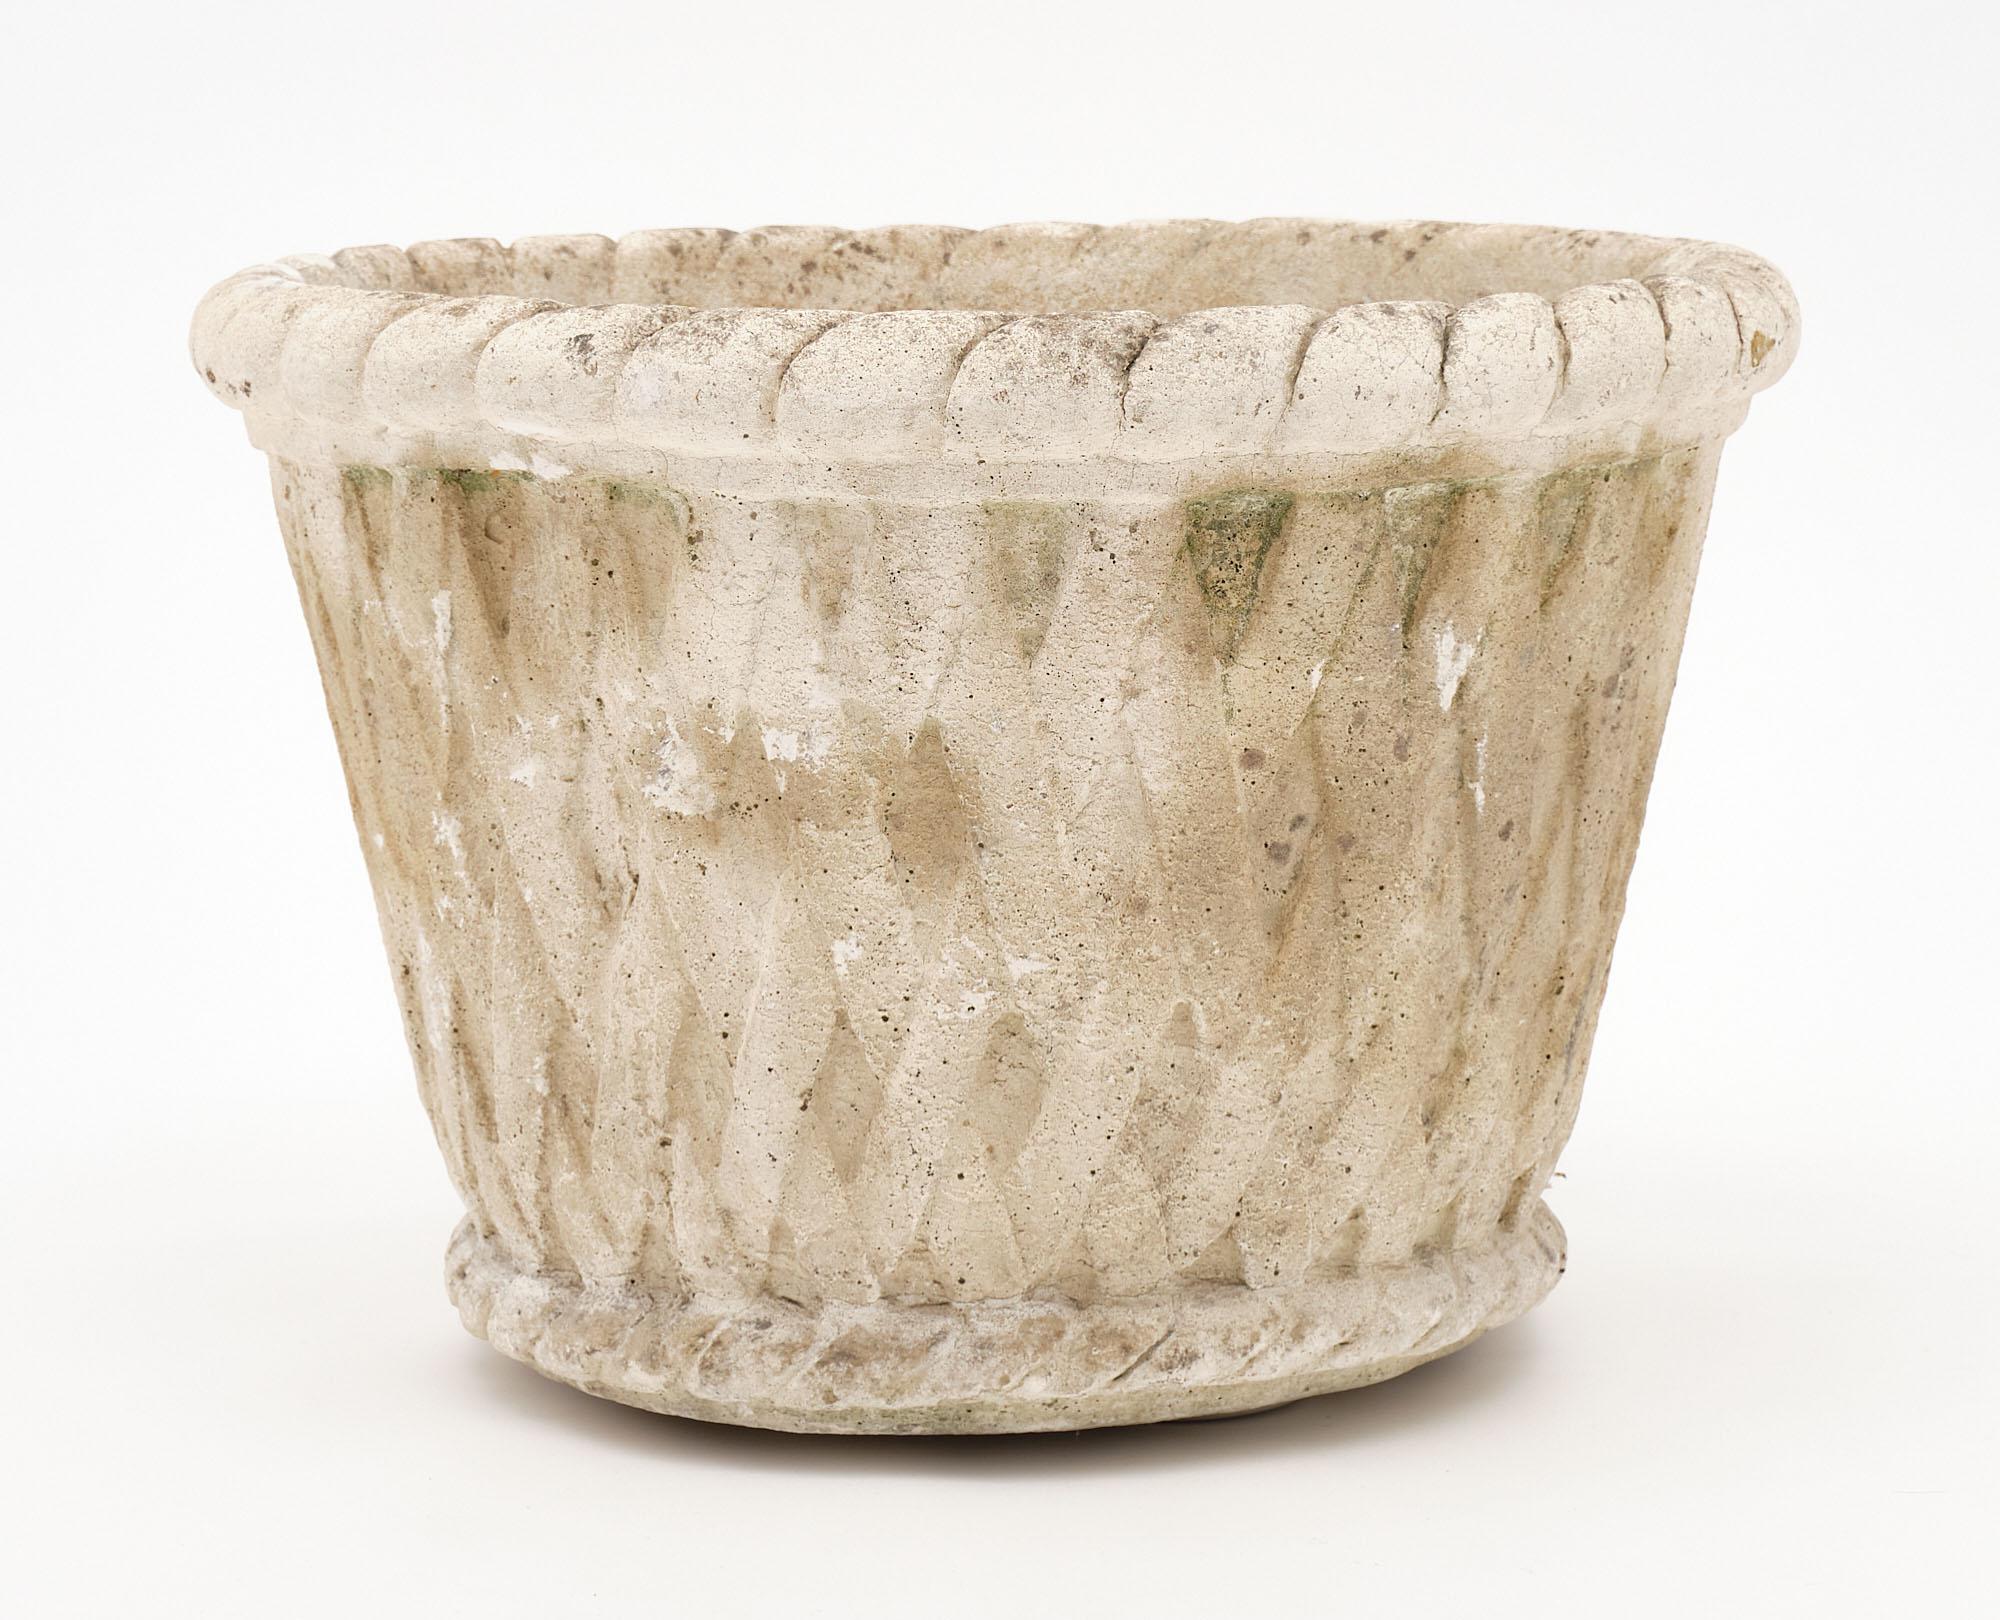 Jardiniere from France made of reconstituted stone.